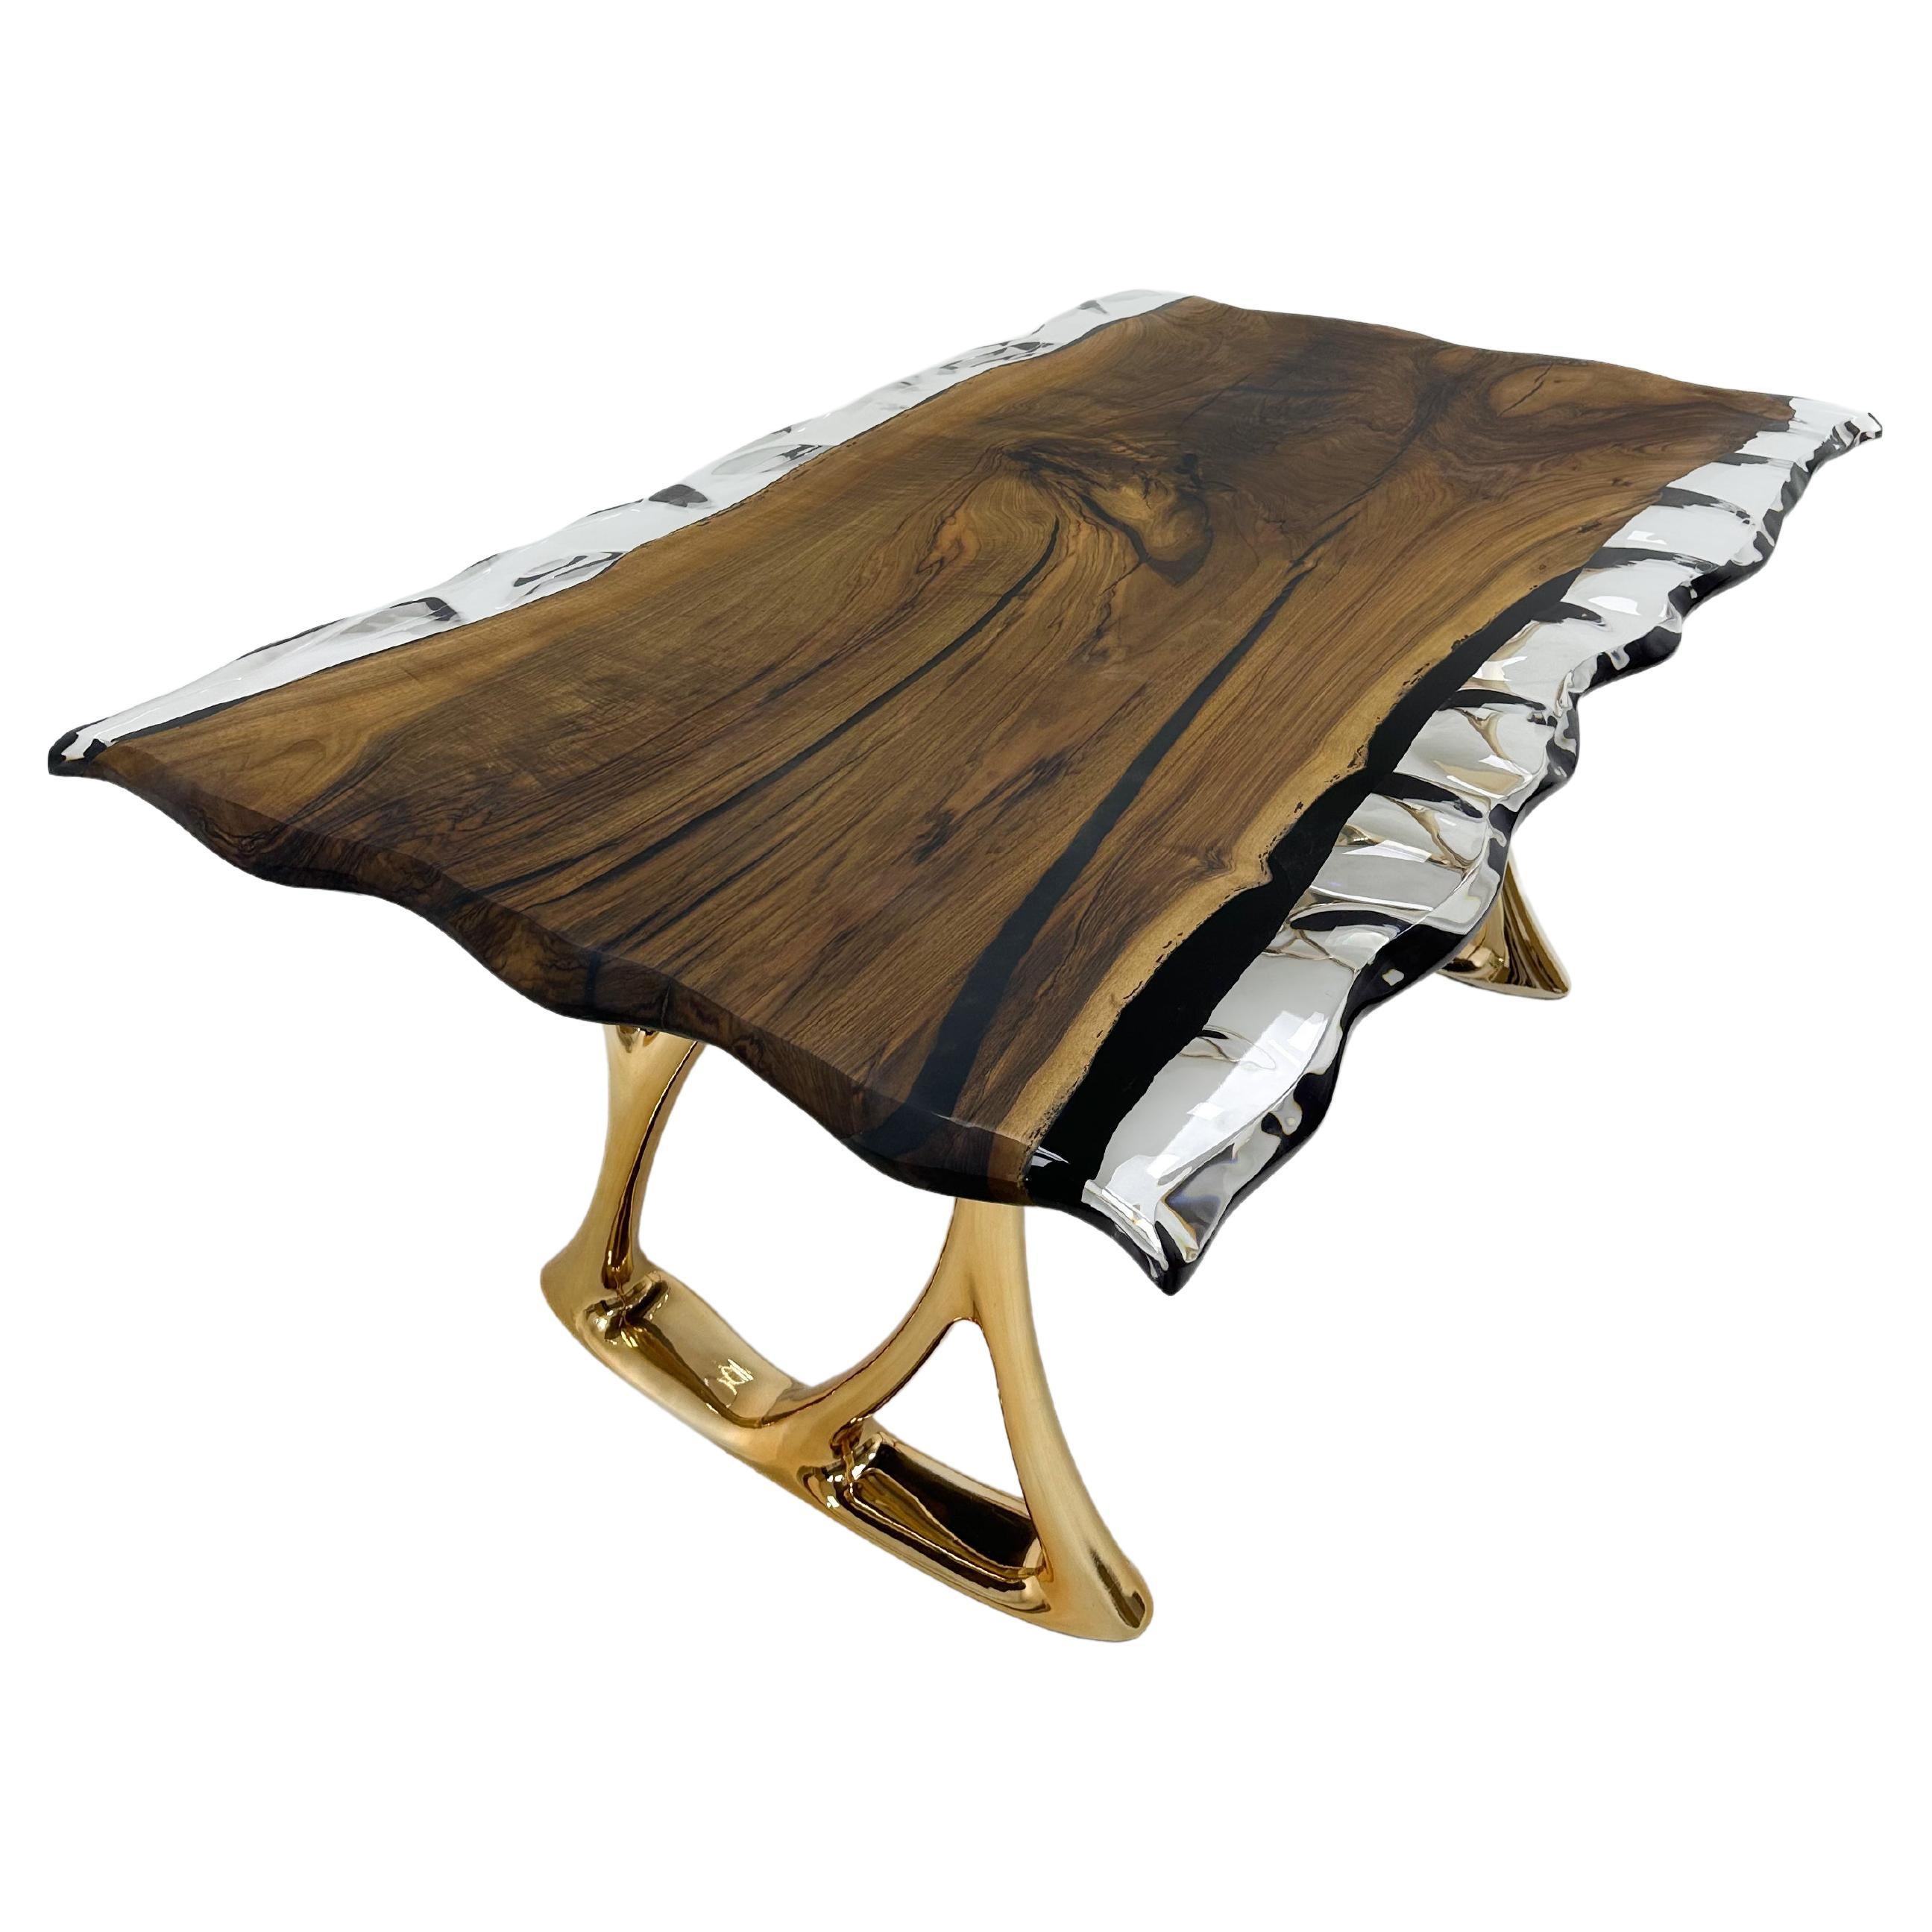 Custom Clear Epoxy Resin Walnut Wood Dining Table - Natural Wood Table For Sale